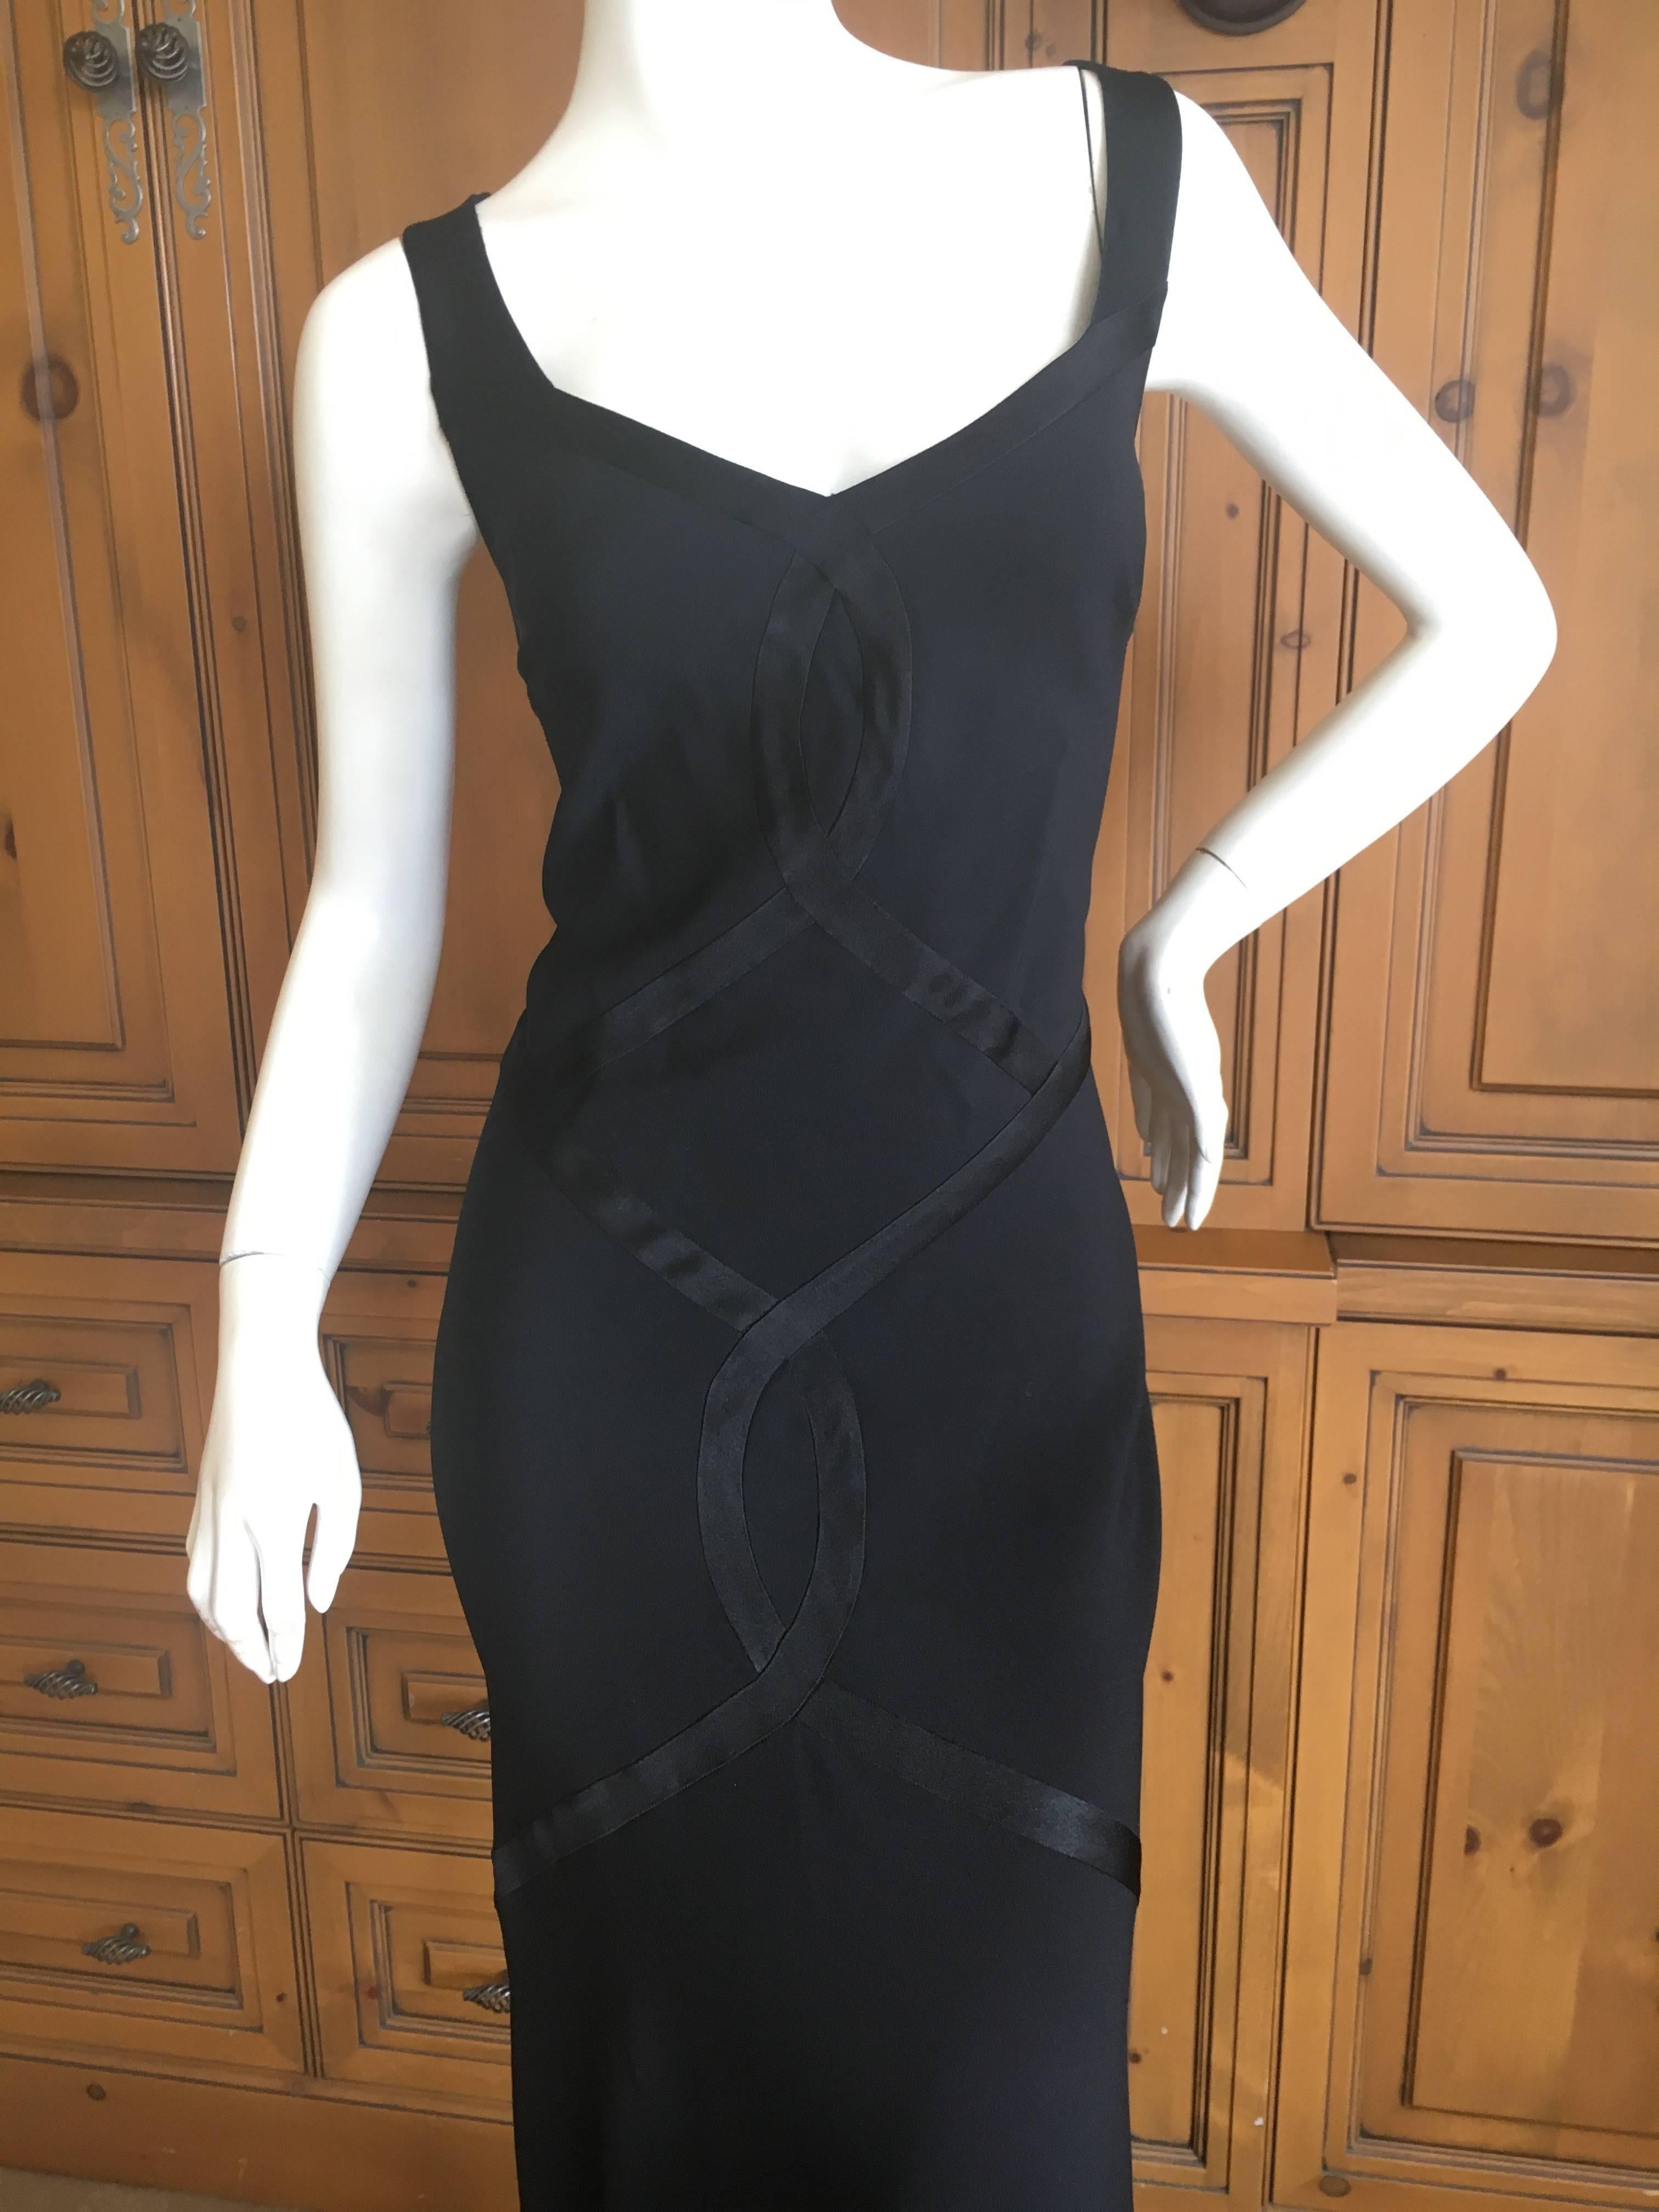 John Galliano 2001 Black Bias Cut Evening Dress with Train New with Tags Size 46 In Excellent Condition For Sale In Cloverdale, CA